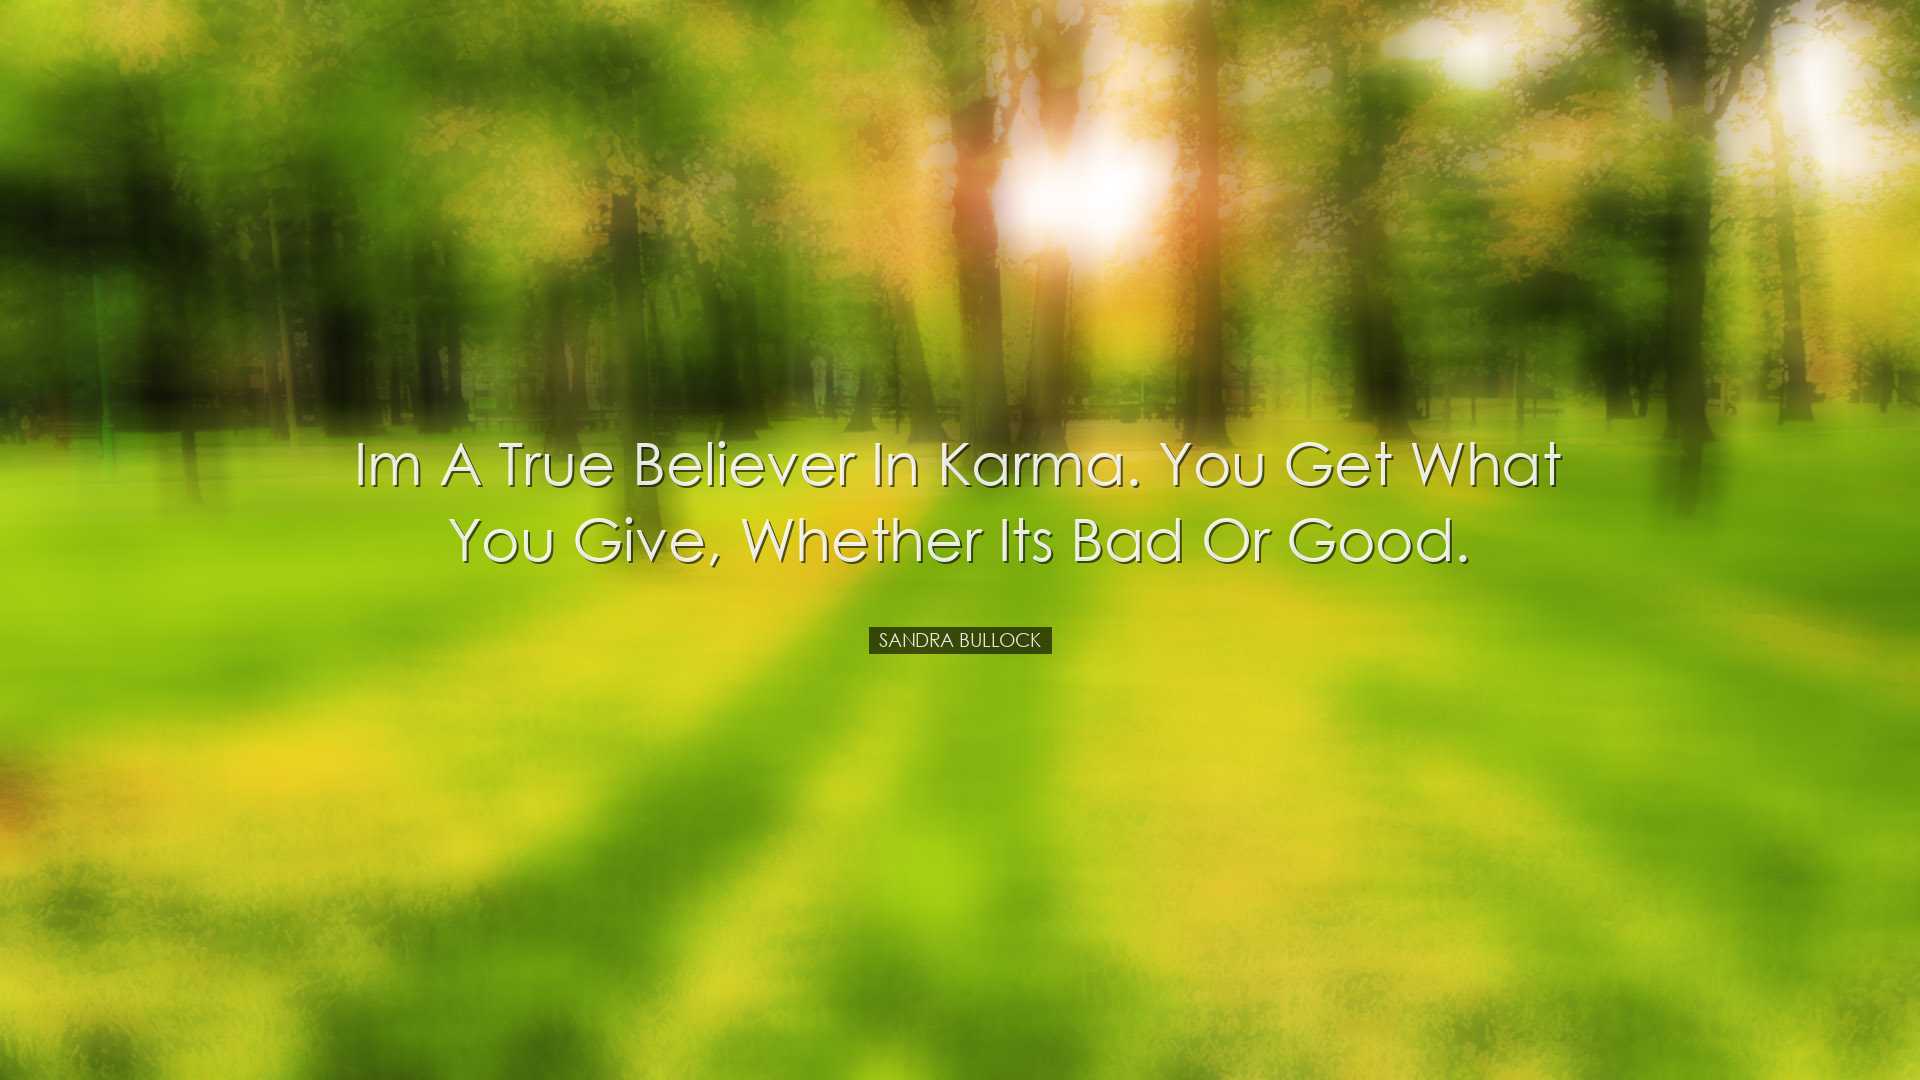 Im a true believer in karma. You get what you give, whether its ba